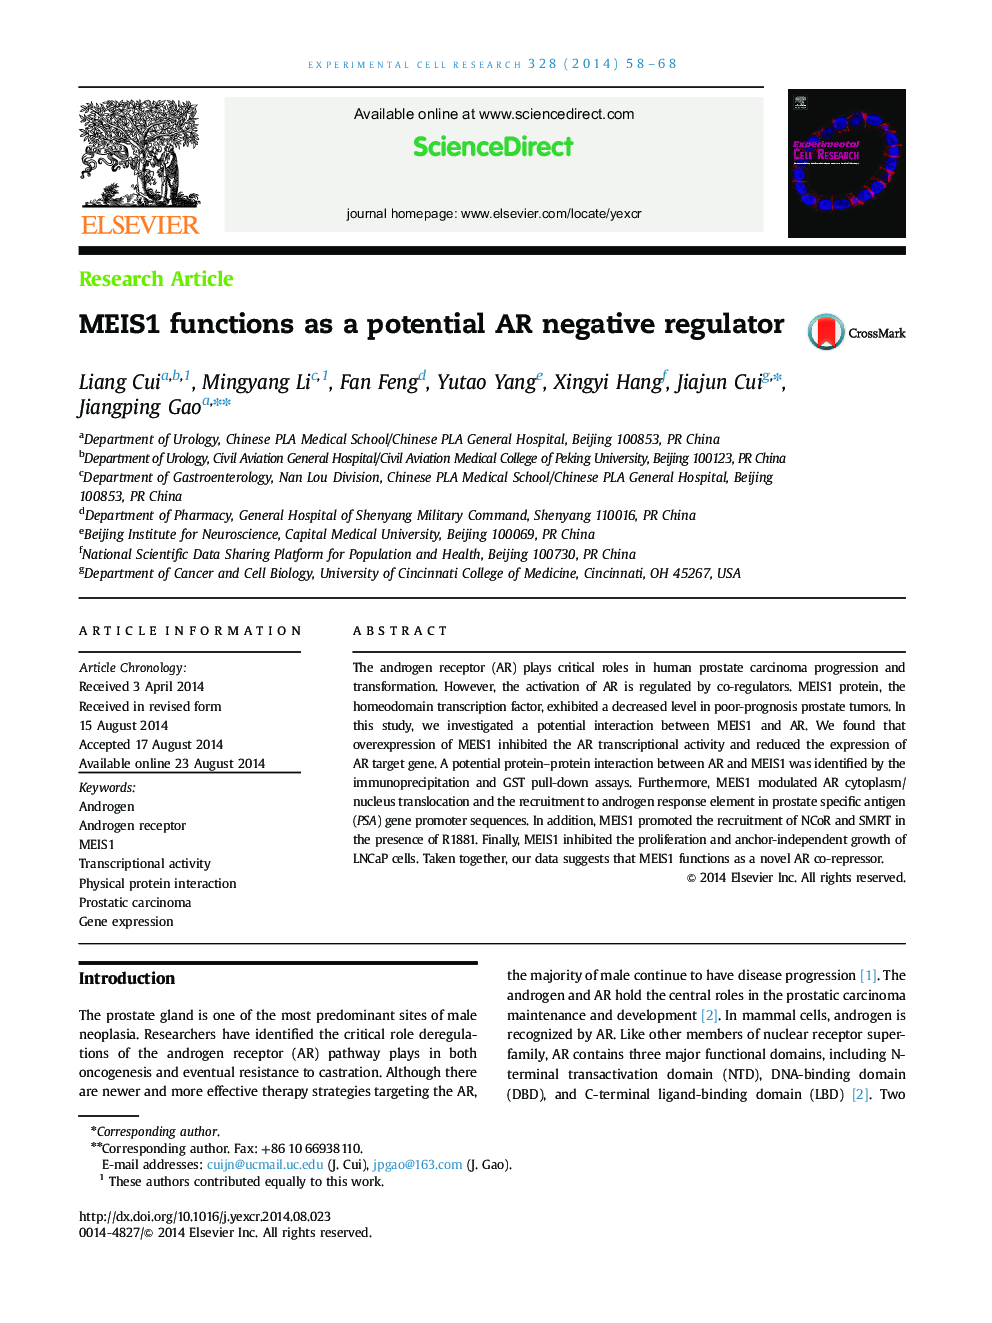 MEIS1 functions as a potential AR negative regulator